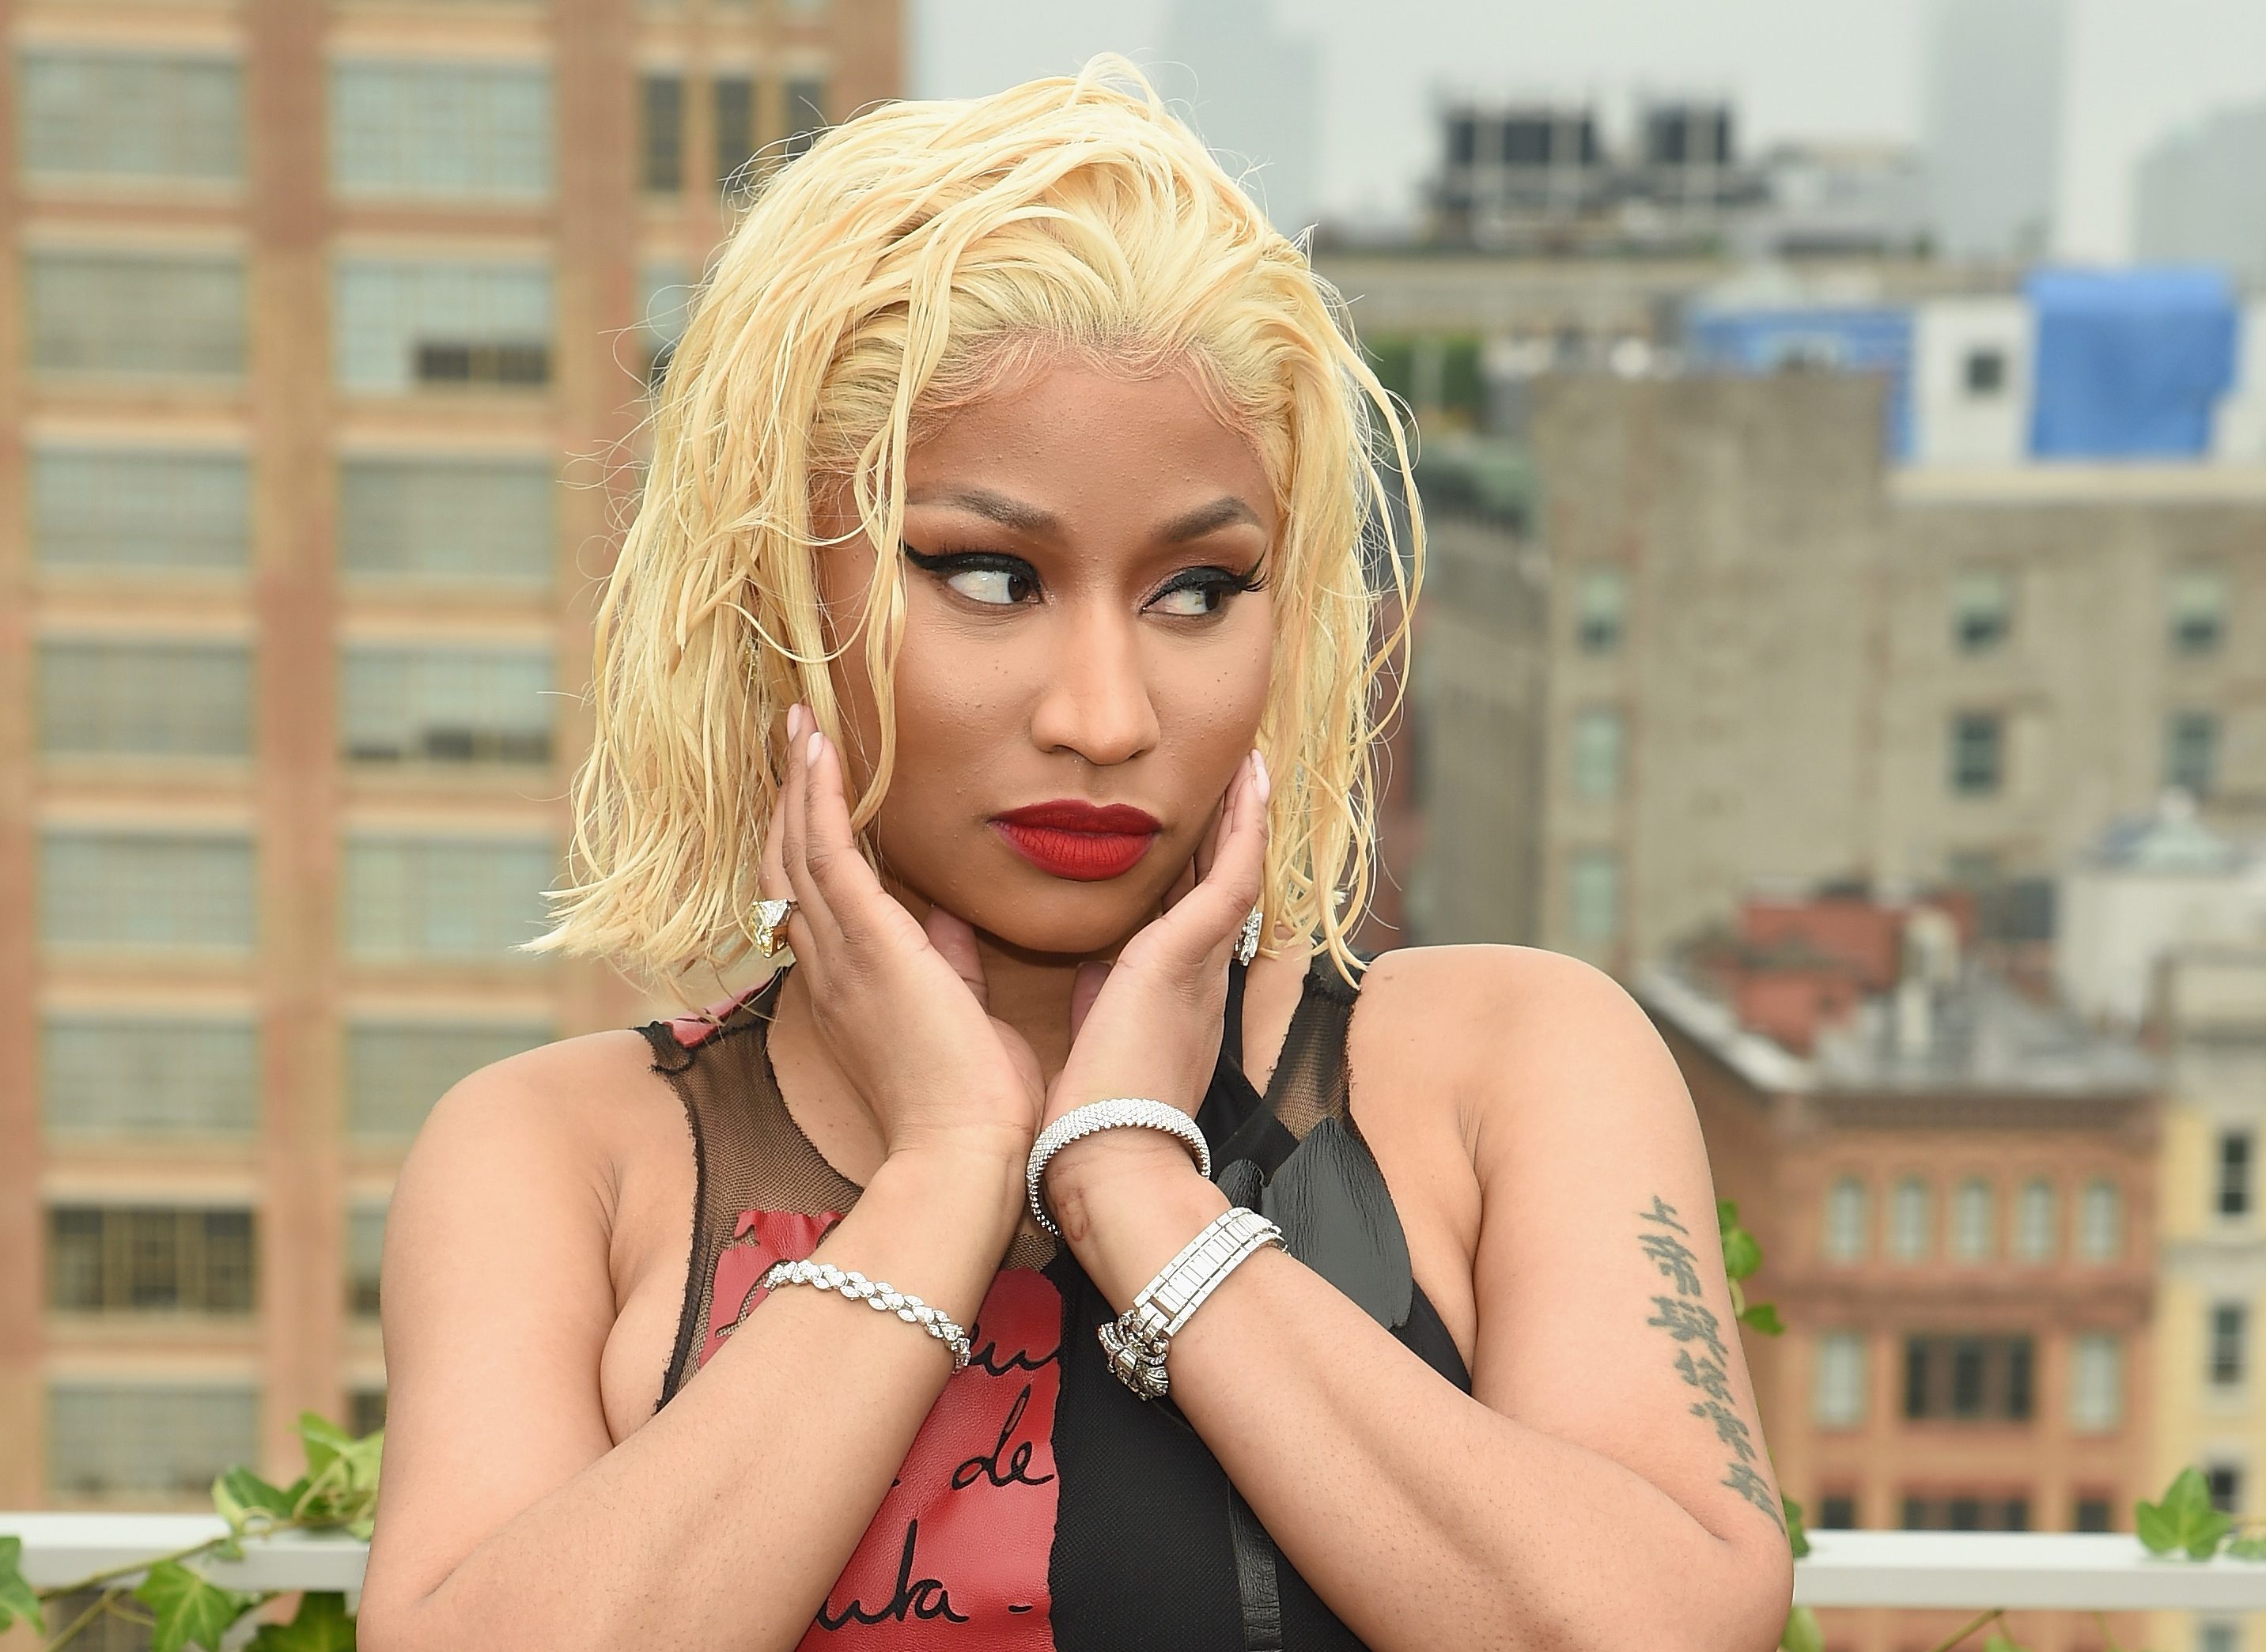 Nicki Minaj Blasts YouTube After Video Receives “Age-Restricted Content” Notice